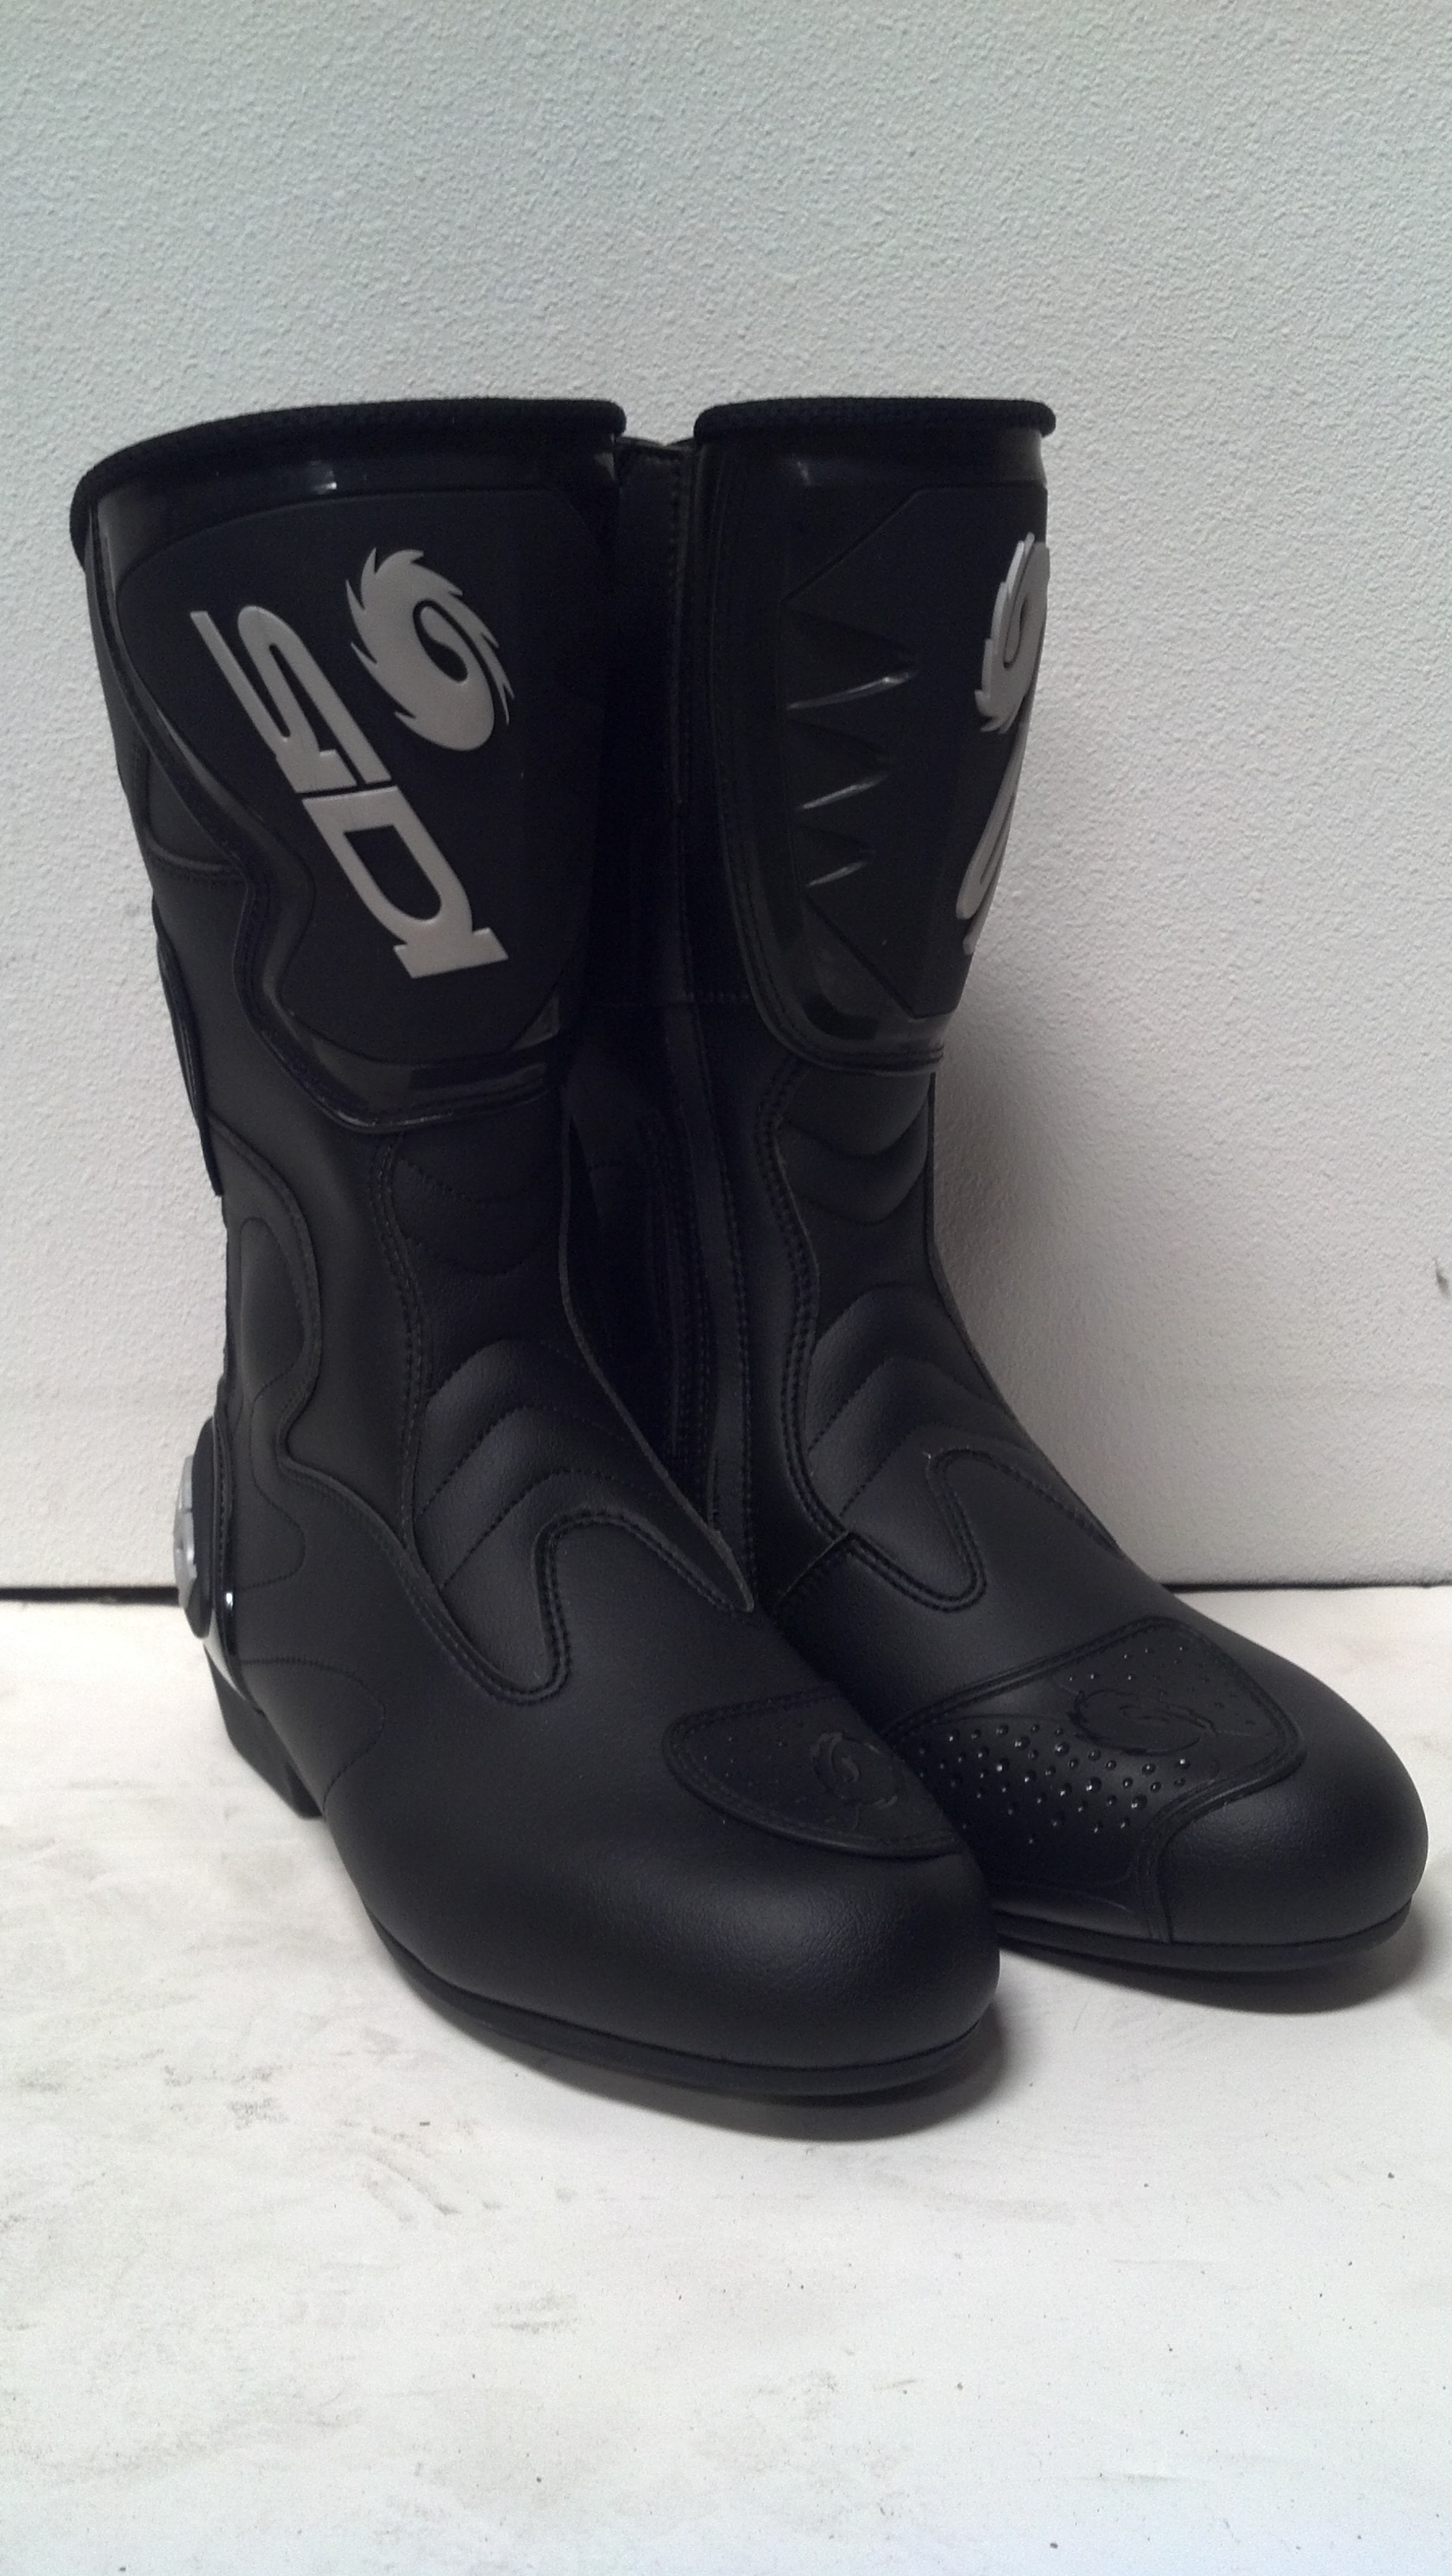 Viewing Images For SIDI Fusion Rain :: MotorcycleGear.com